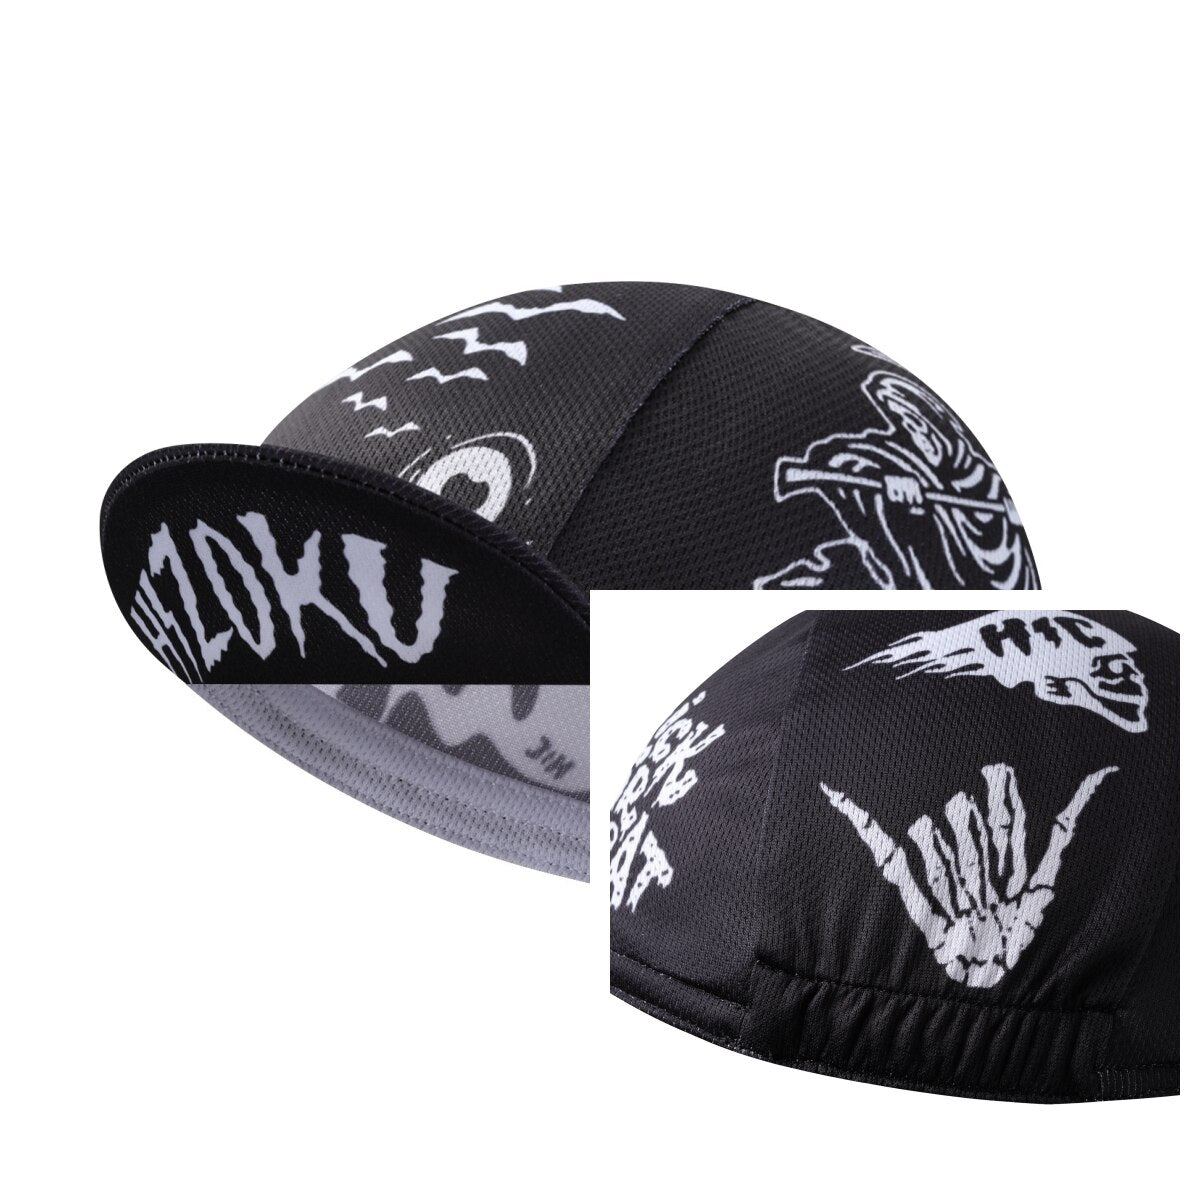 Men's Cycling Cap - Polyester Skull Cycling Hat-Under Helmet - Cycling Helmet Liner Breathable&Sweat Uptake